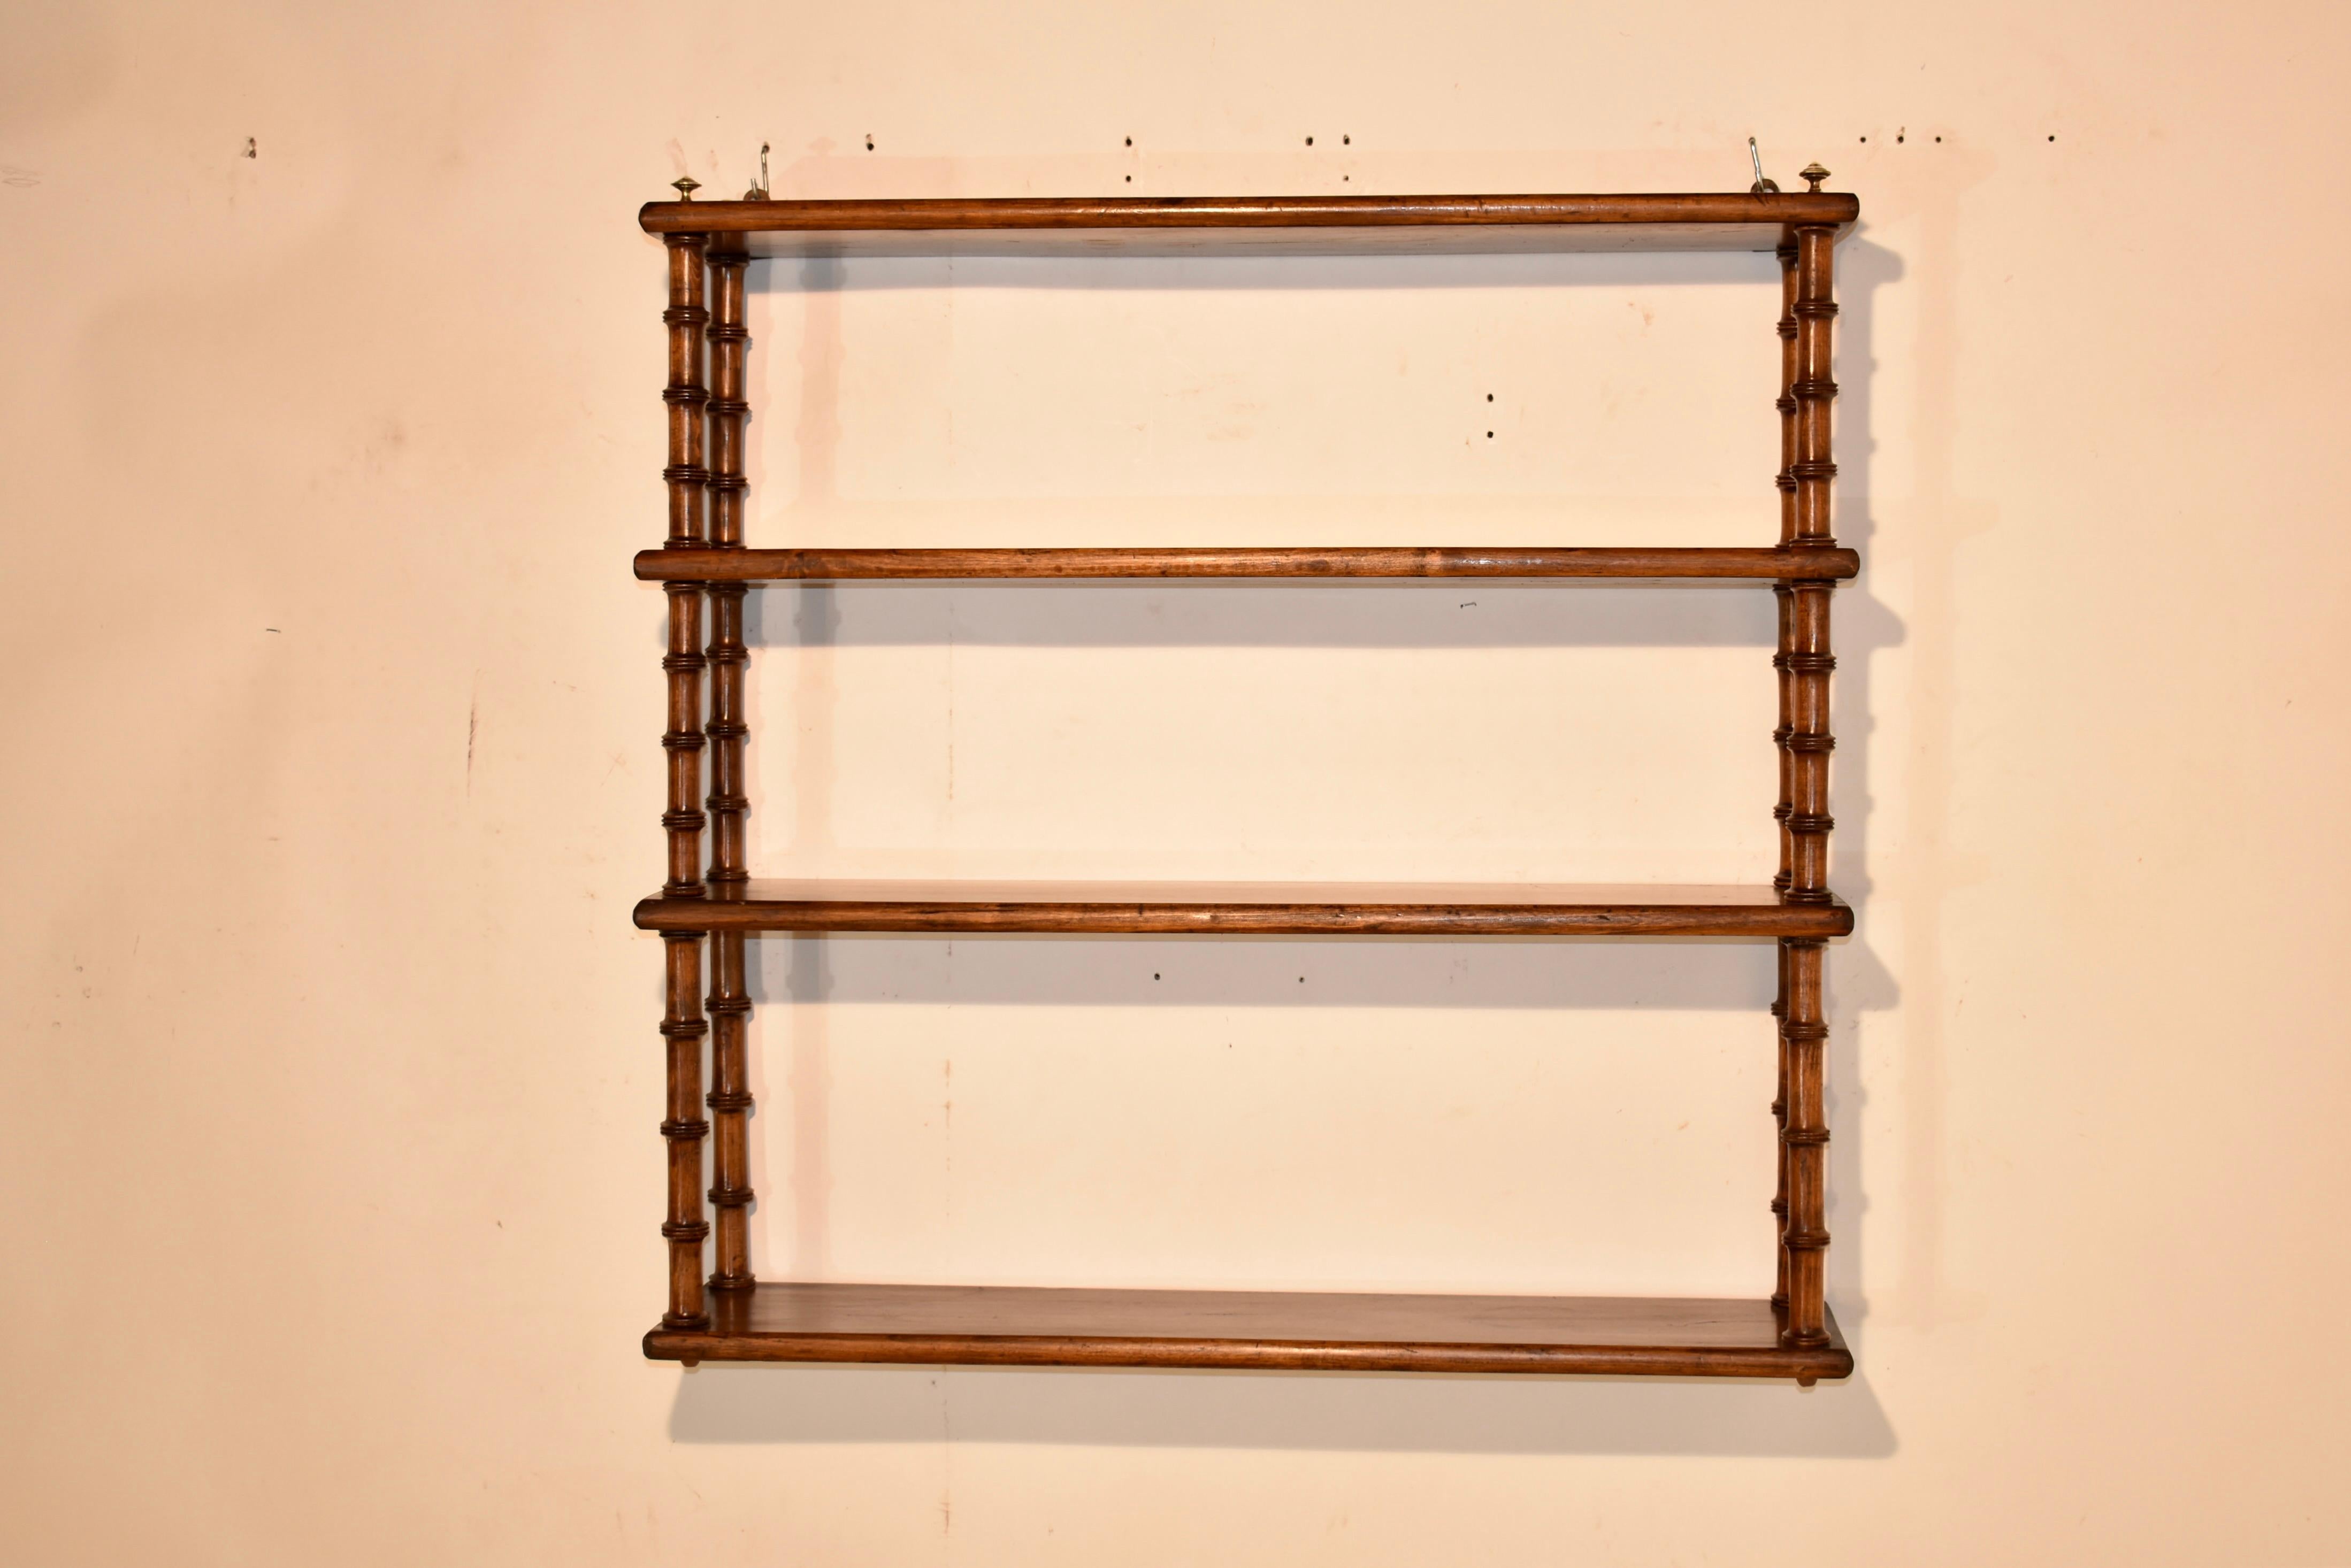 19th century hanging wall shelf from France.  The shelf is made from cherry and rosewood.  There are four shelves, all made from rosewood, joined by hand turned cherry shelf supports.  This is a lovely small shelf, which would be great in a